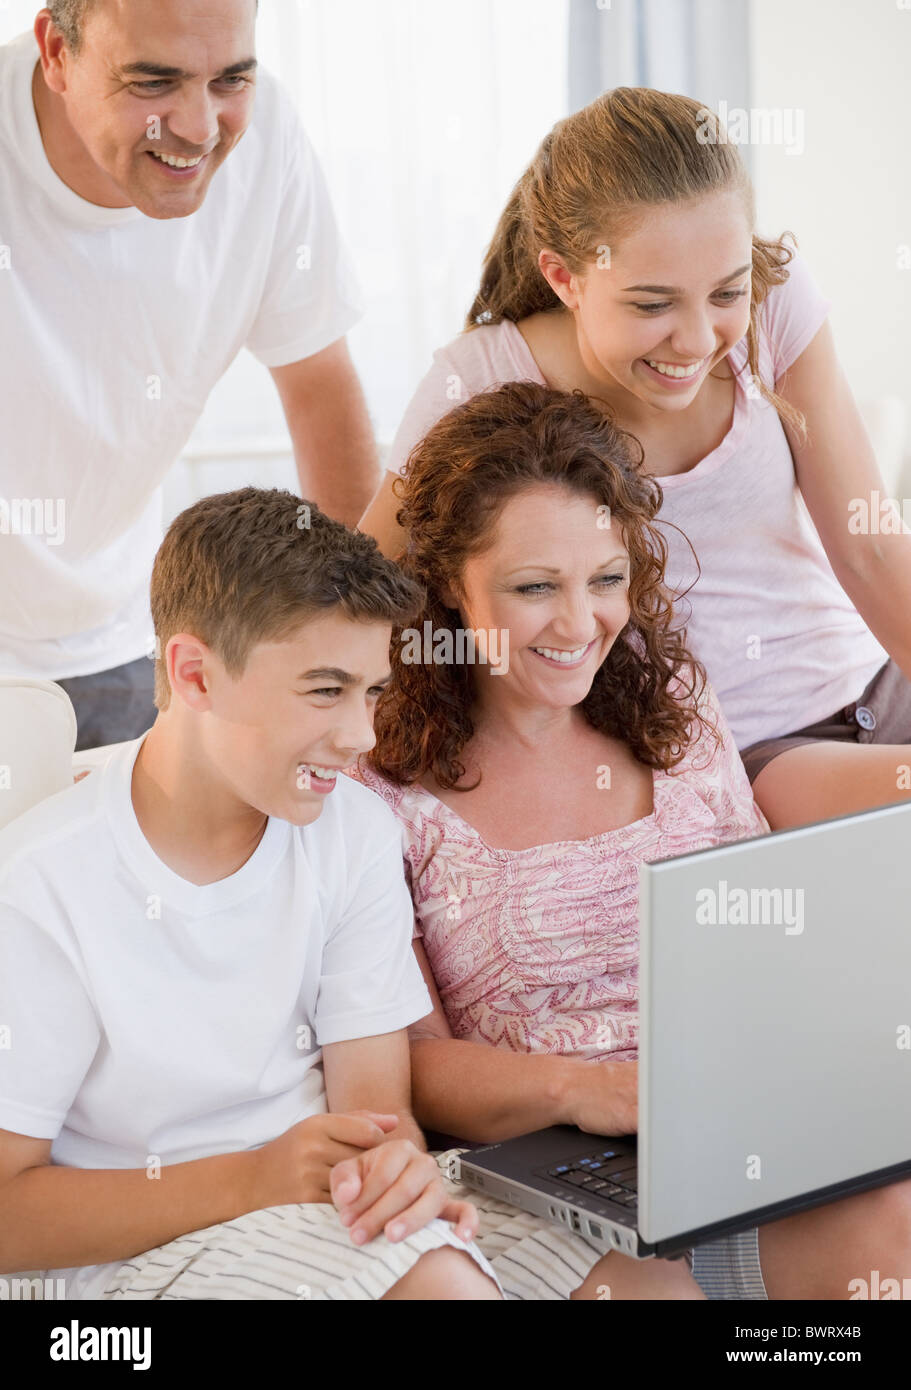 Smiling Hispanic family using laptop together Banque D'Images